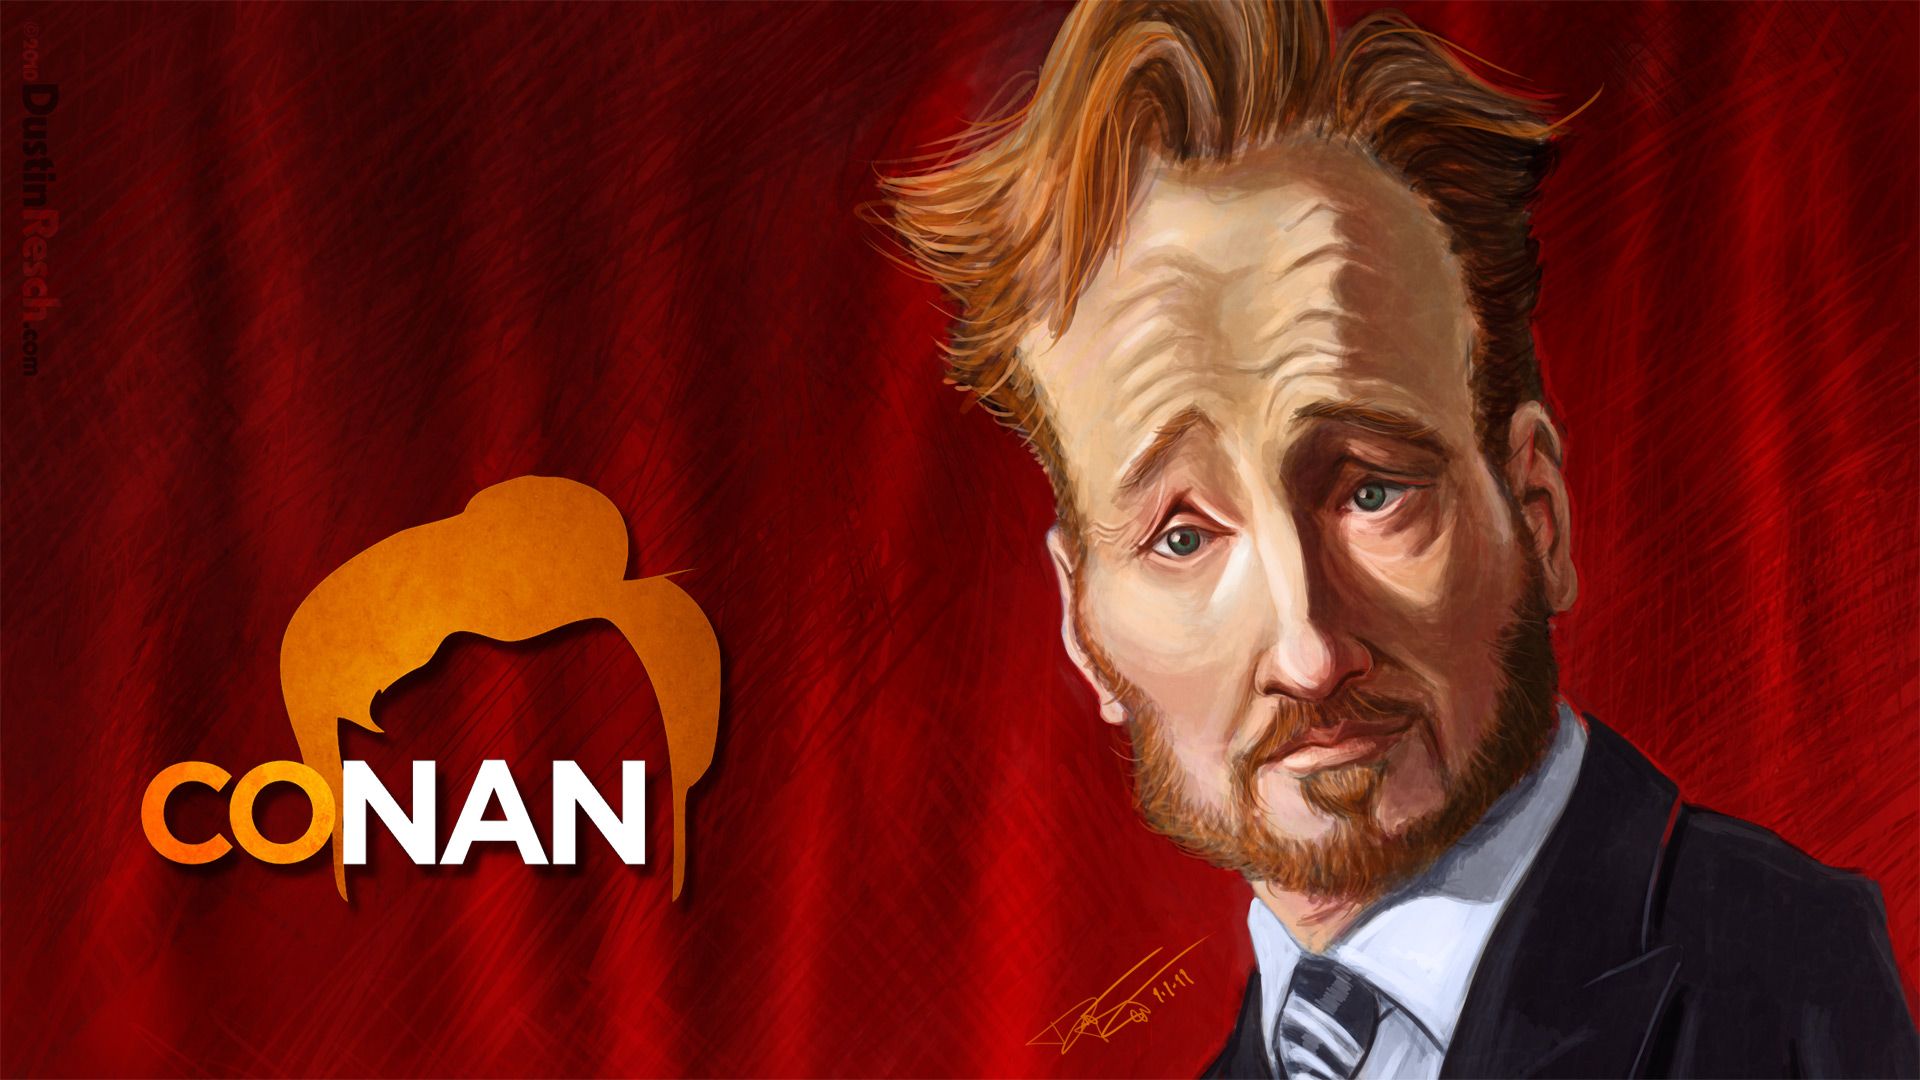 HD desktop wallpaper featuring an illustrated artwork of a man with recognizable hairstyle on a red background with CONAN logo.